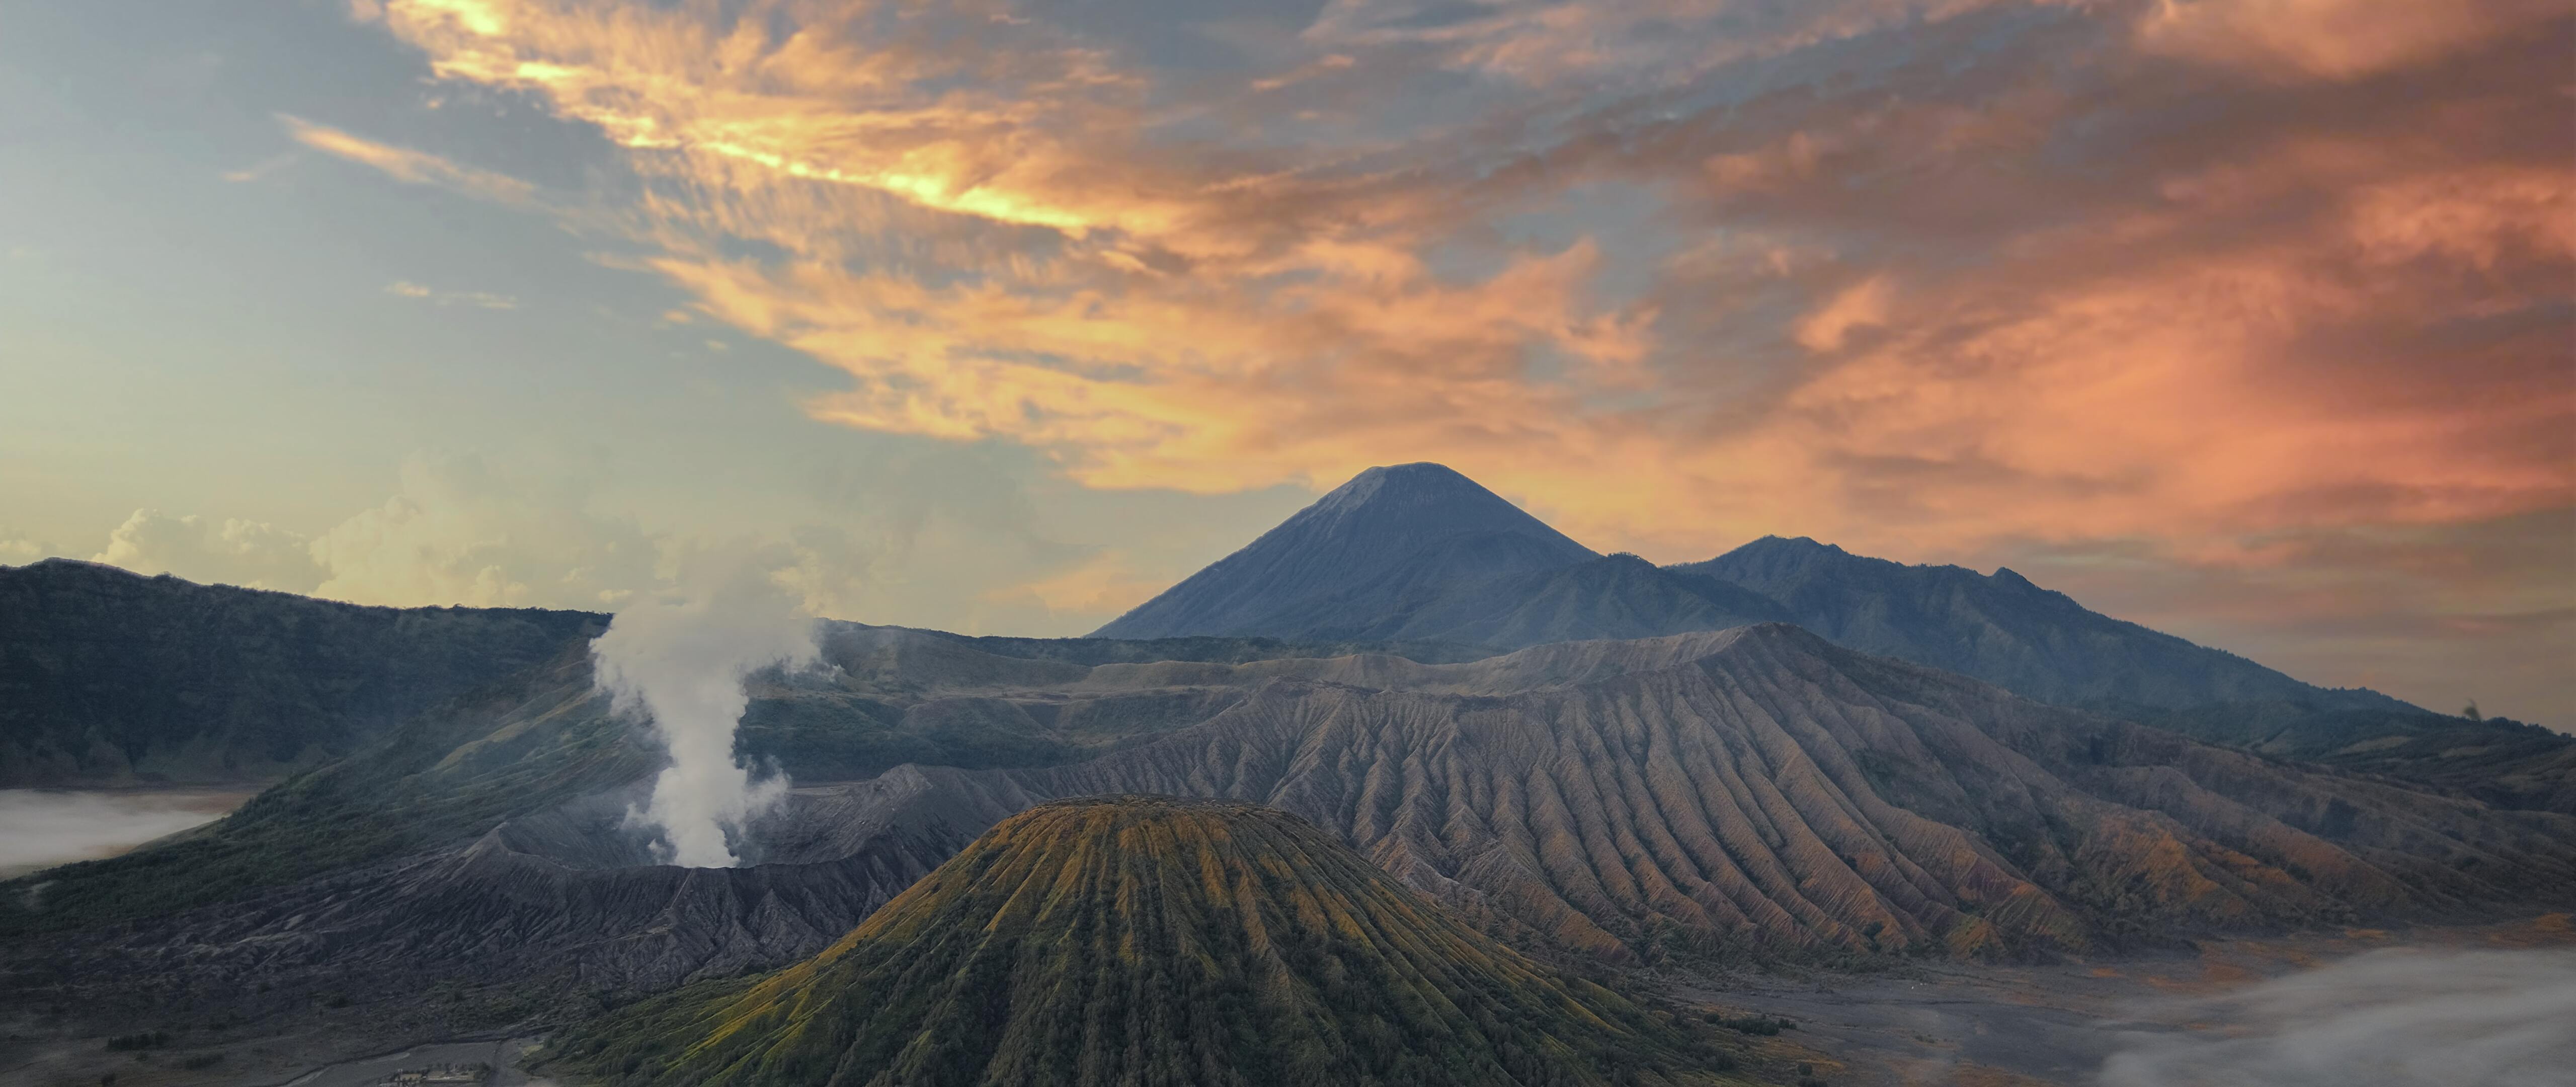 Bromo 4K wallpapers for your desktop or mobile screen free and easy to  download